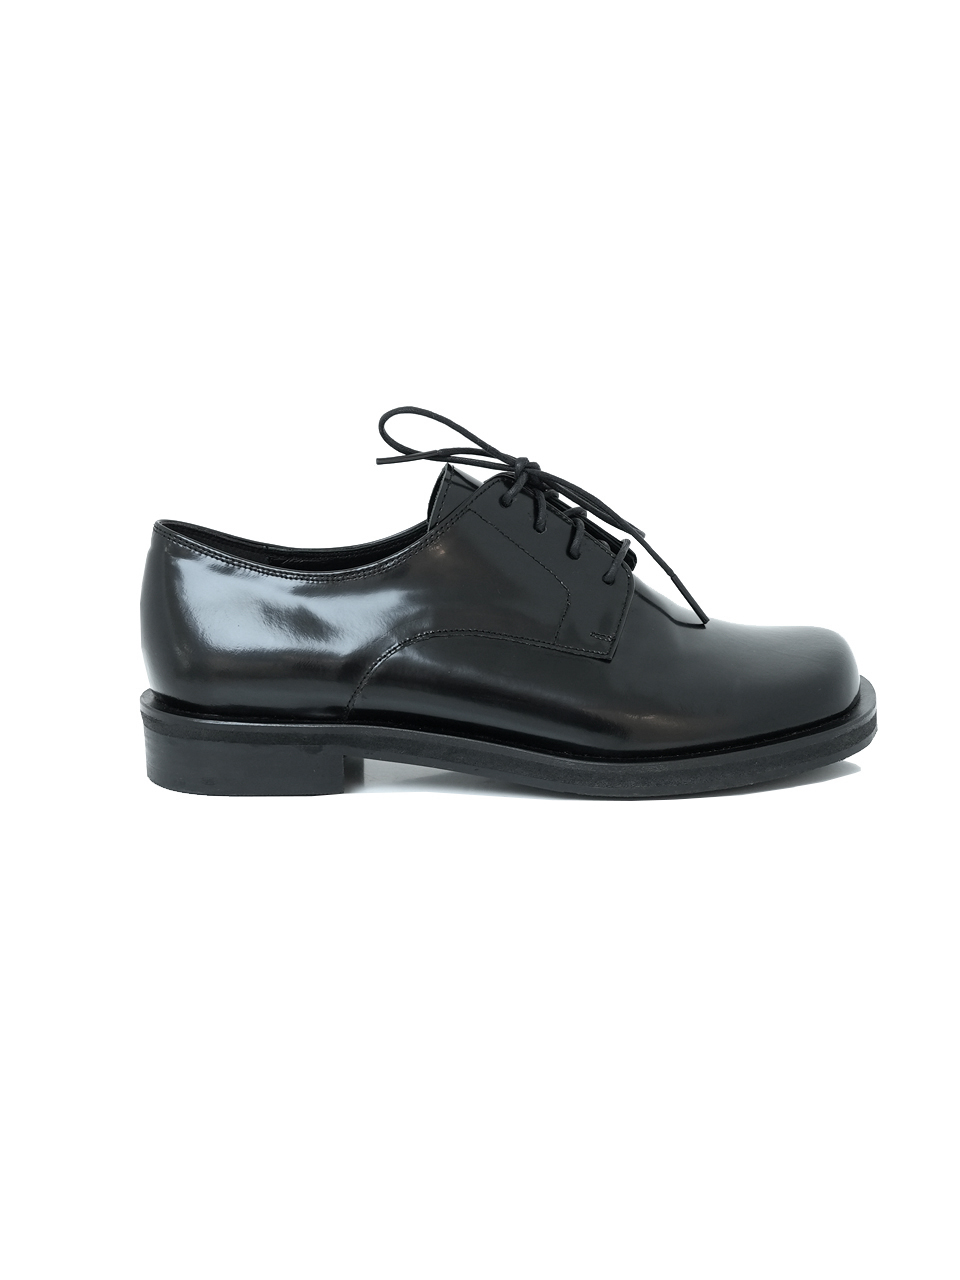 PEARL DERBY SHOES-black